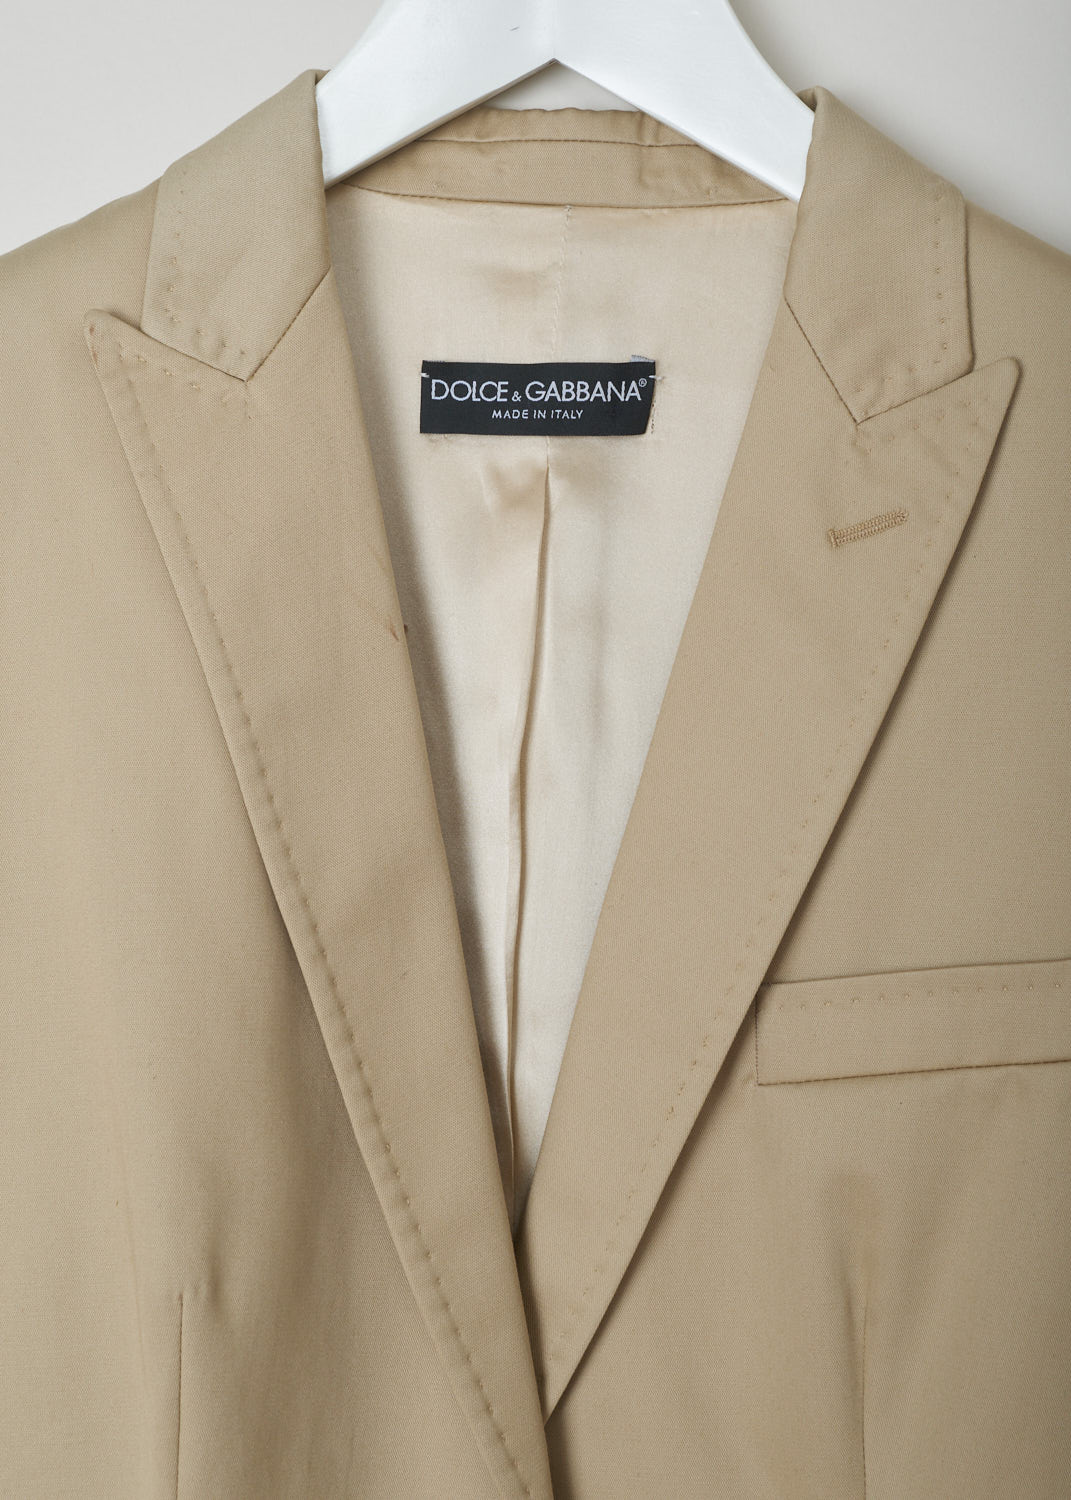 Dolce & Gabbana, Beige blazer, F1415O_FU5EI_M0263, beige,detail, Beige colored blazer made with a peak lapel and a single button closure on the front, going further down this model has a pocket on chest height and two flap pockets below that. On the back this jacket has a single center split.
Lovely pants made with a wide fit in mind, this models is called a flat front with slated pockets and welt pockets on the back. As your closure option this model has a zipper, regular button and a backing button. 